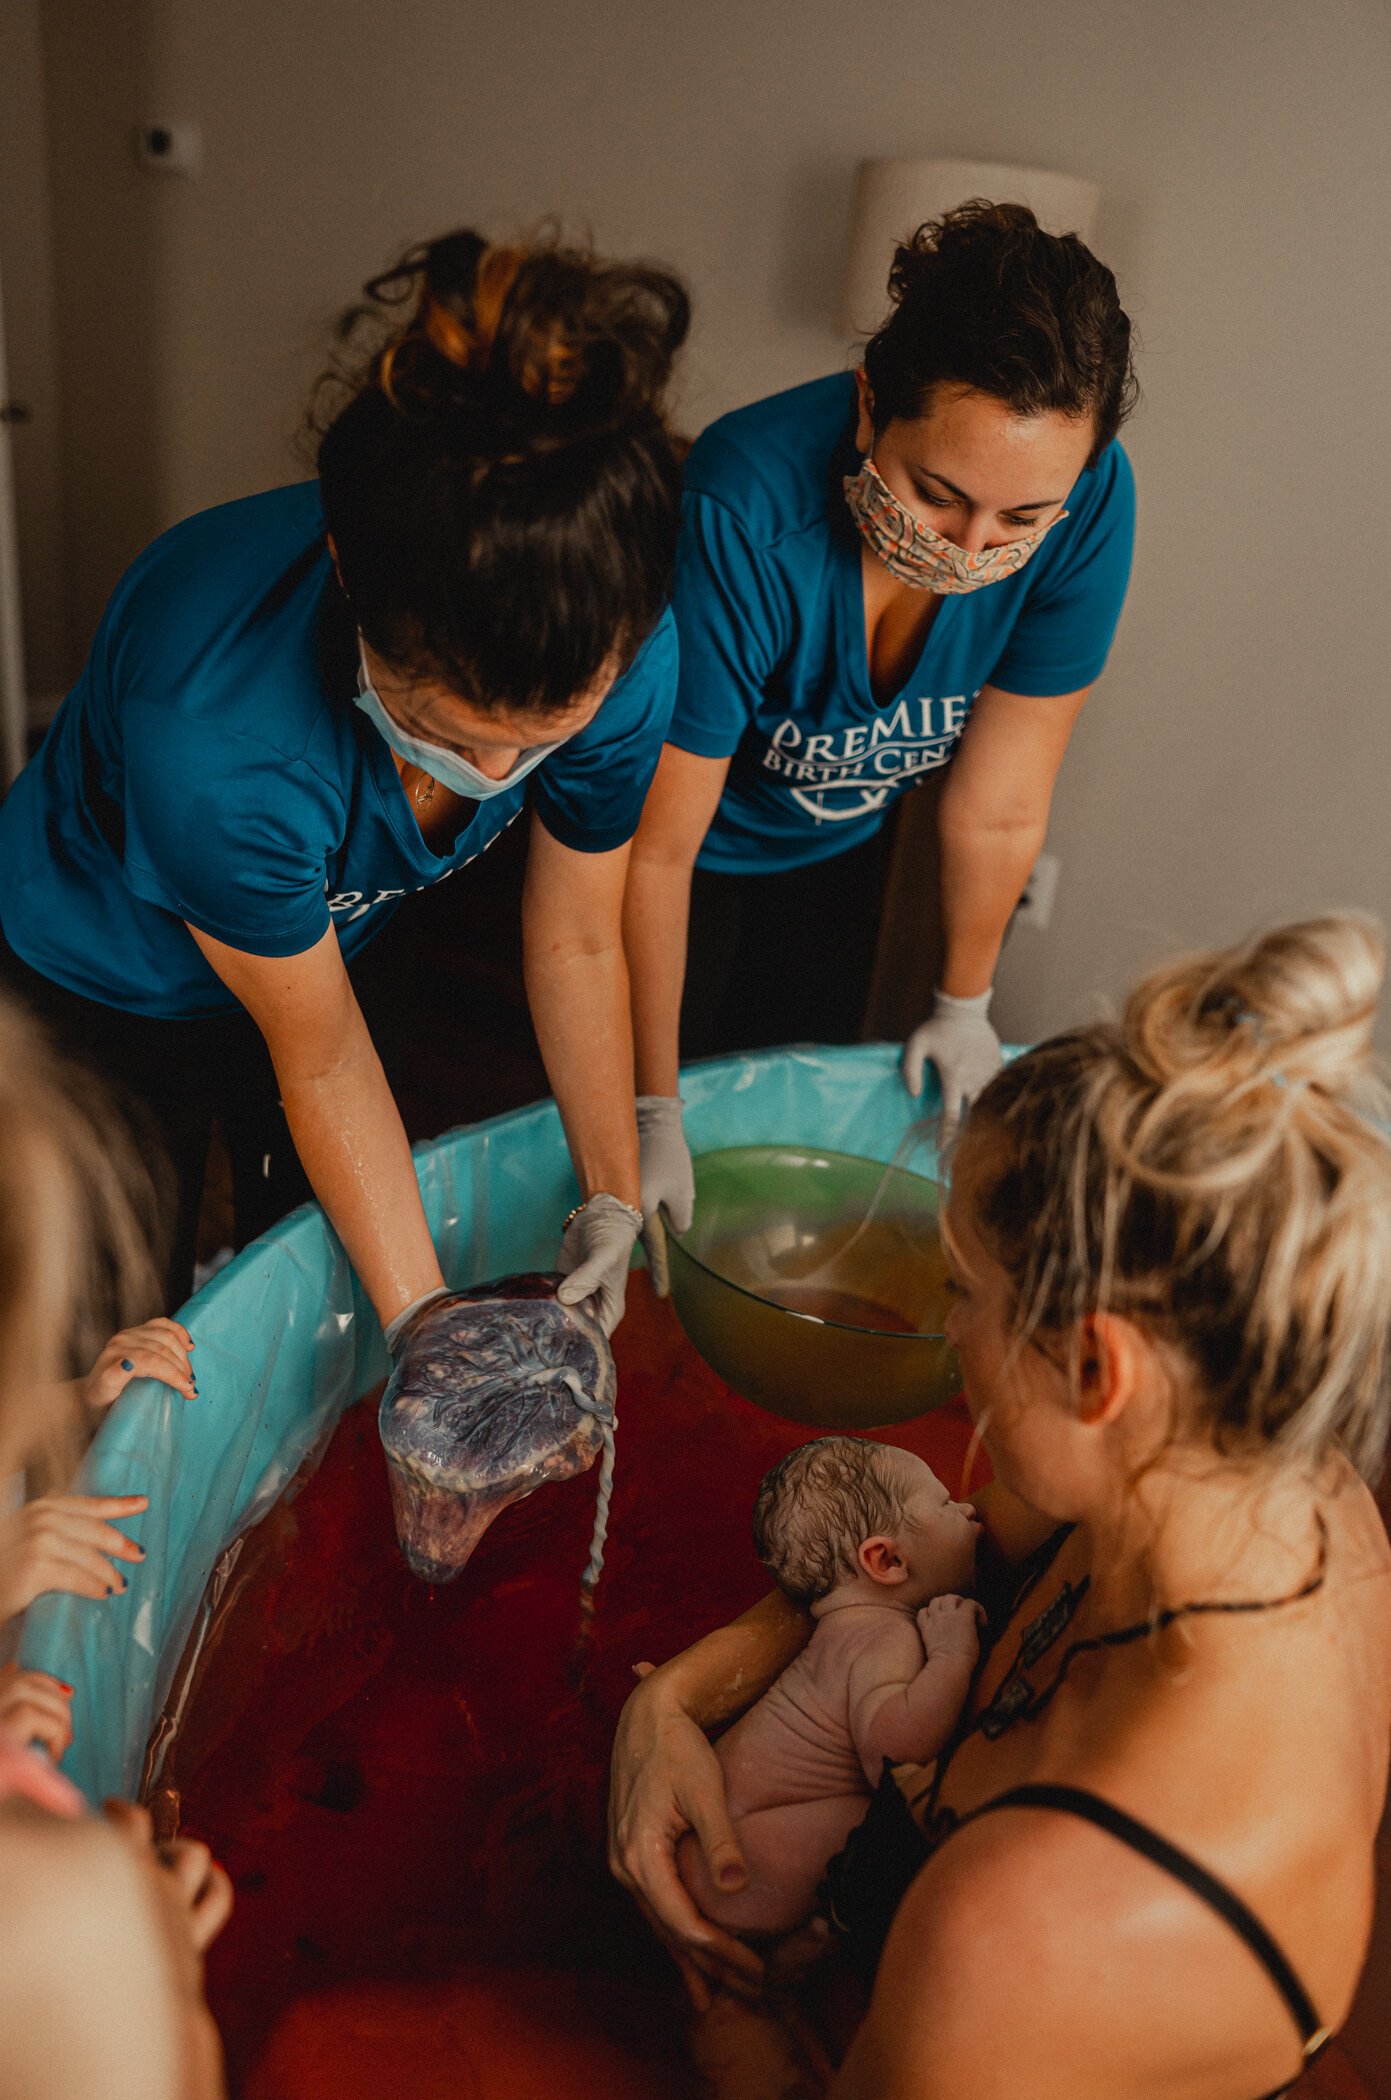 After the placenta is delivered the midwife of premier Birth Center shows off the placenta to the mom who is sitting in the birth pool and her older children who are standing besides her